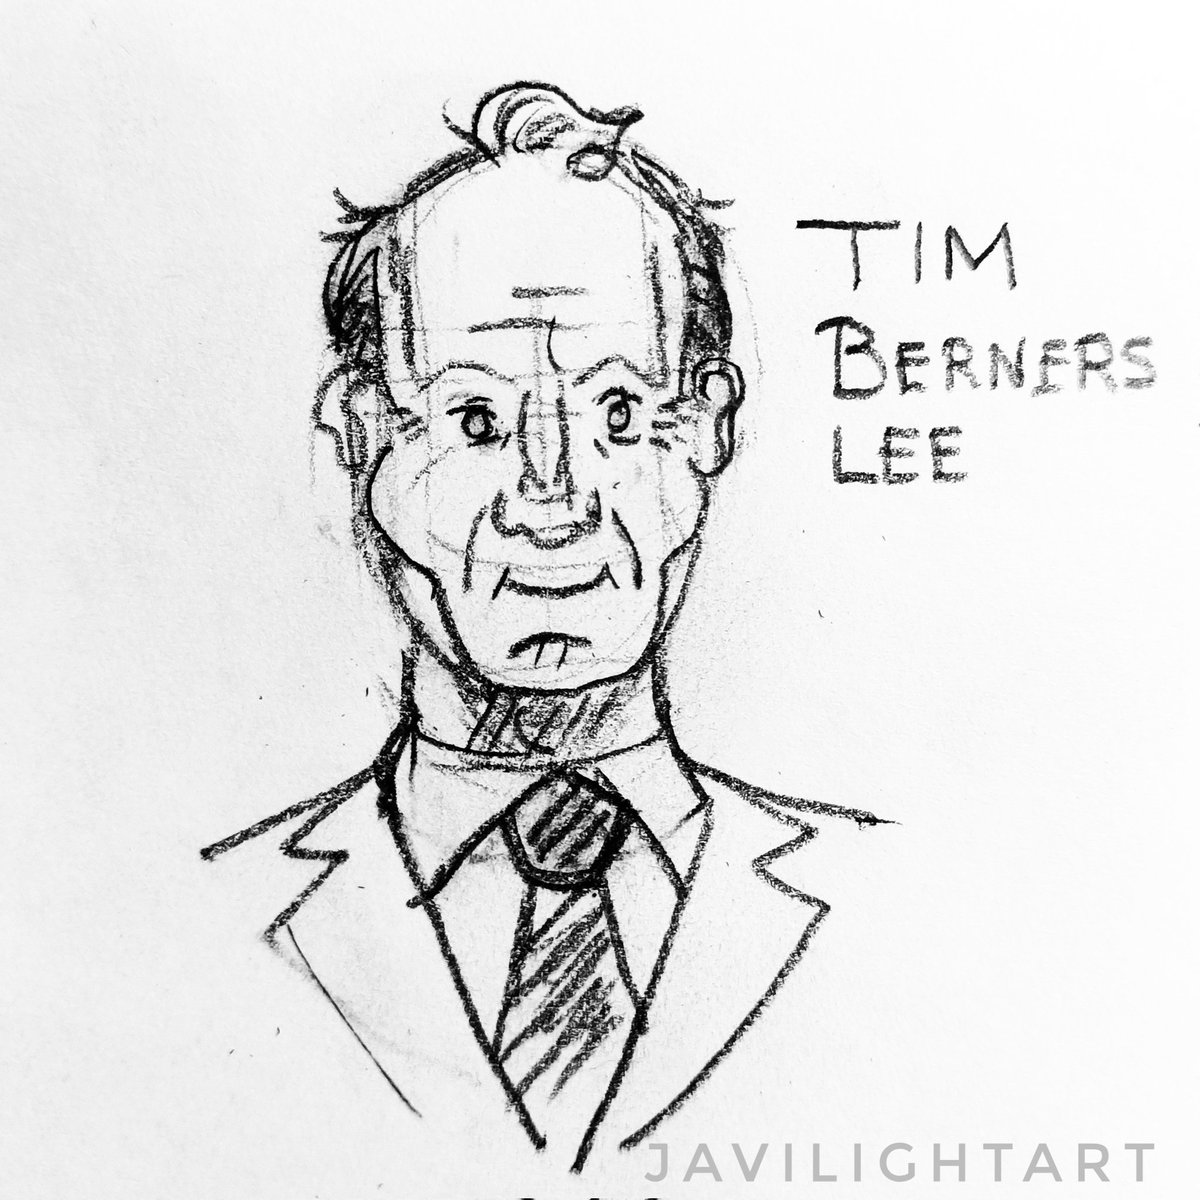 March 12, it's the birthday of the WWW!! Time to remember a Tim Berners-Lee, the creator of the web!!  An amazing collaborative effort used in all the world and in all the human activities!!

#www #timbernerslee #javilightart #wwwbirthday #wwwanniversary  #webfounfation